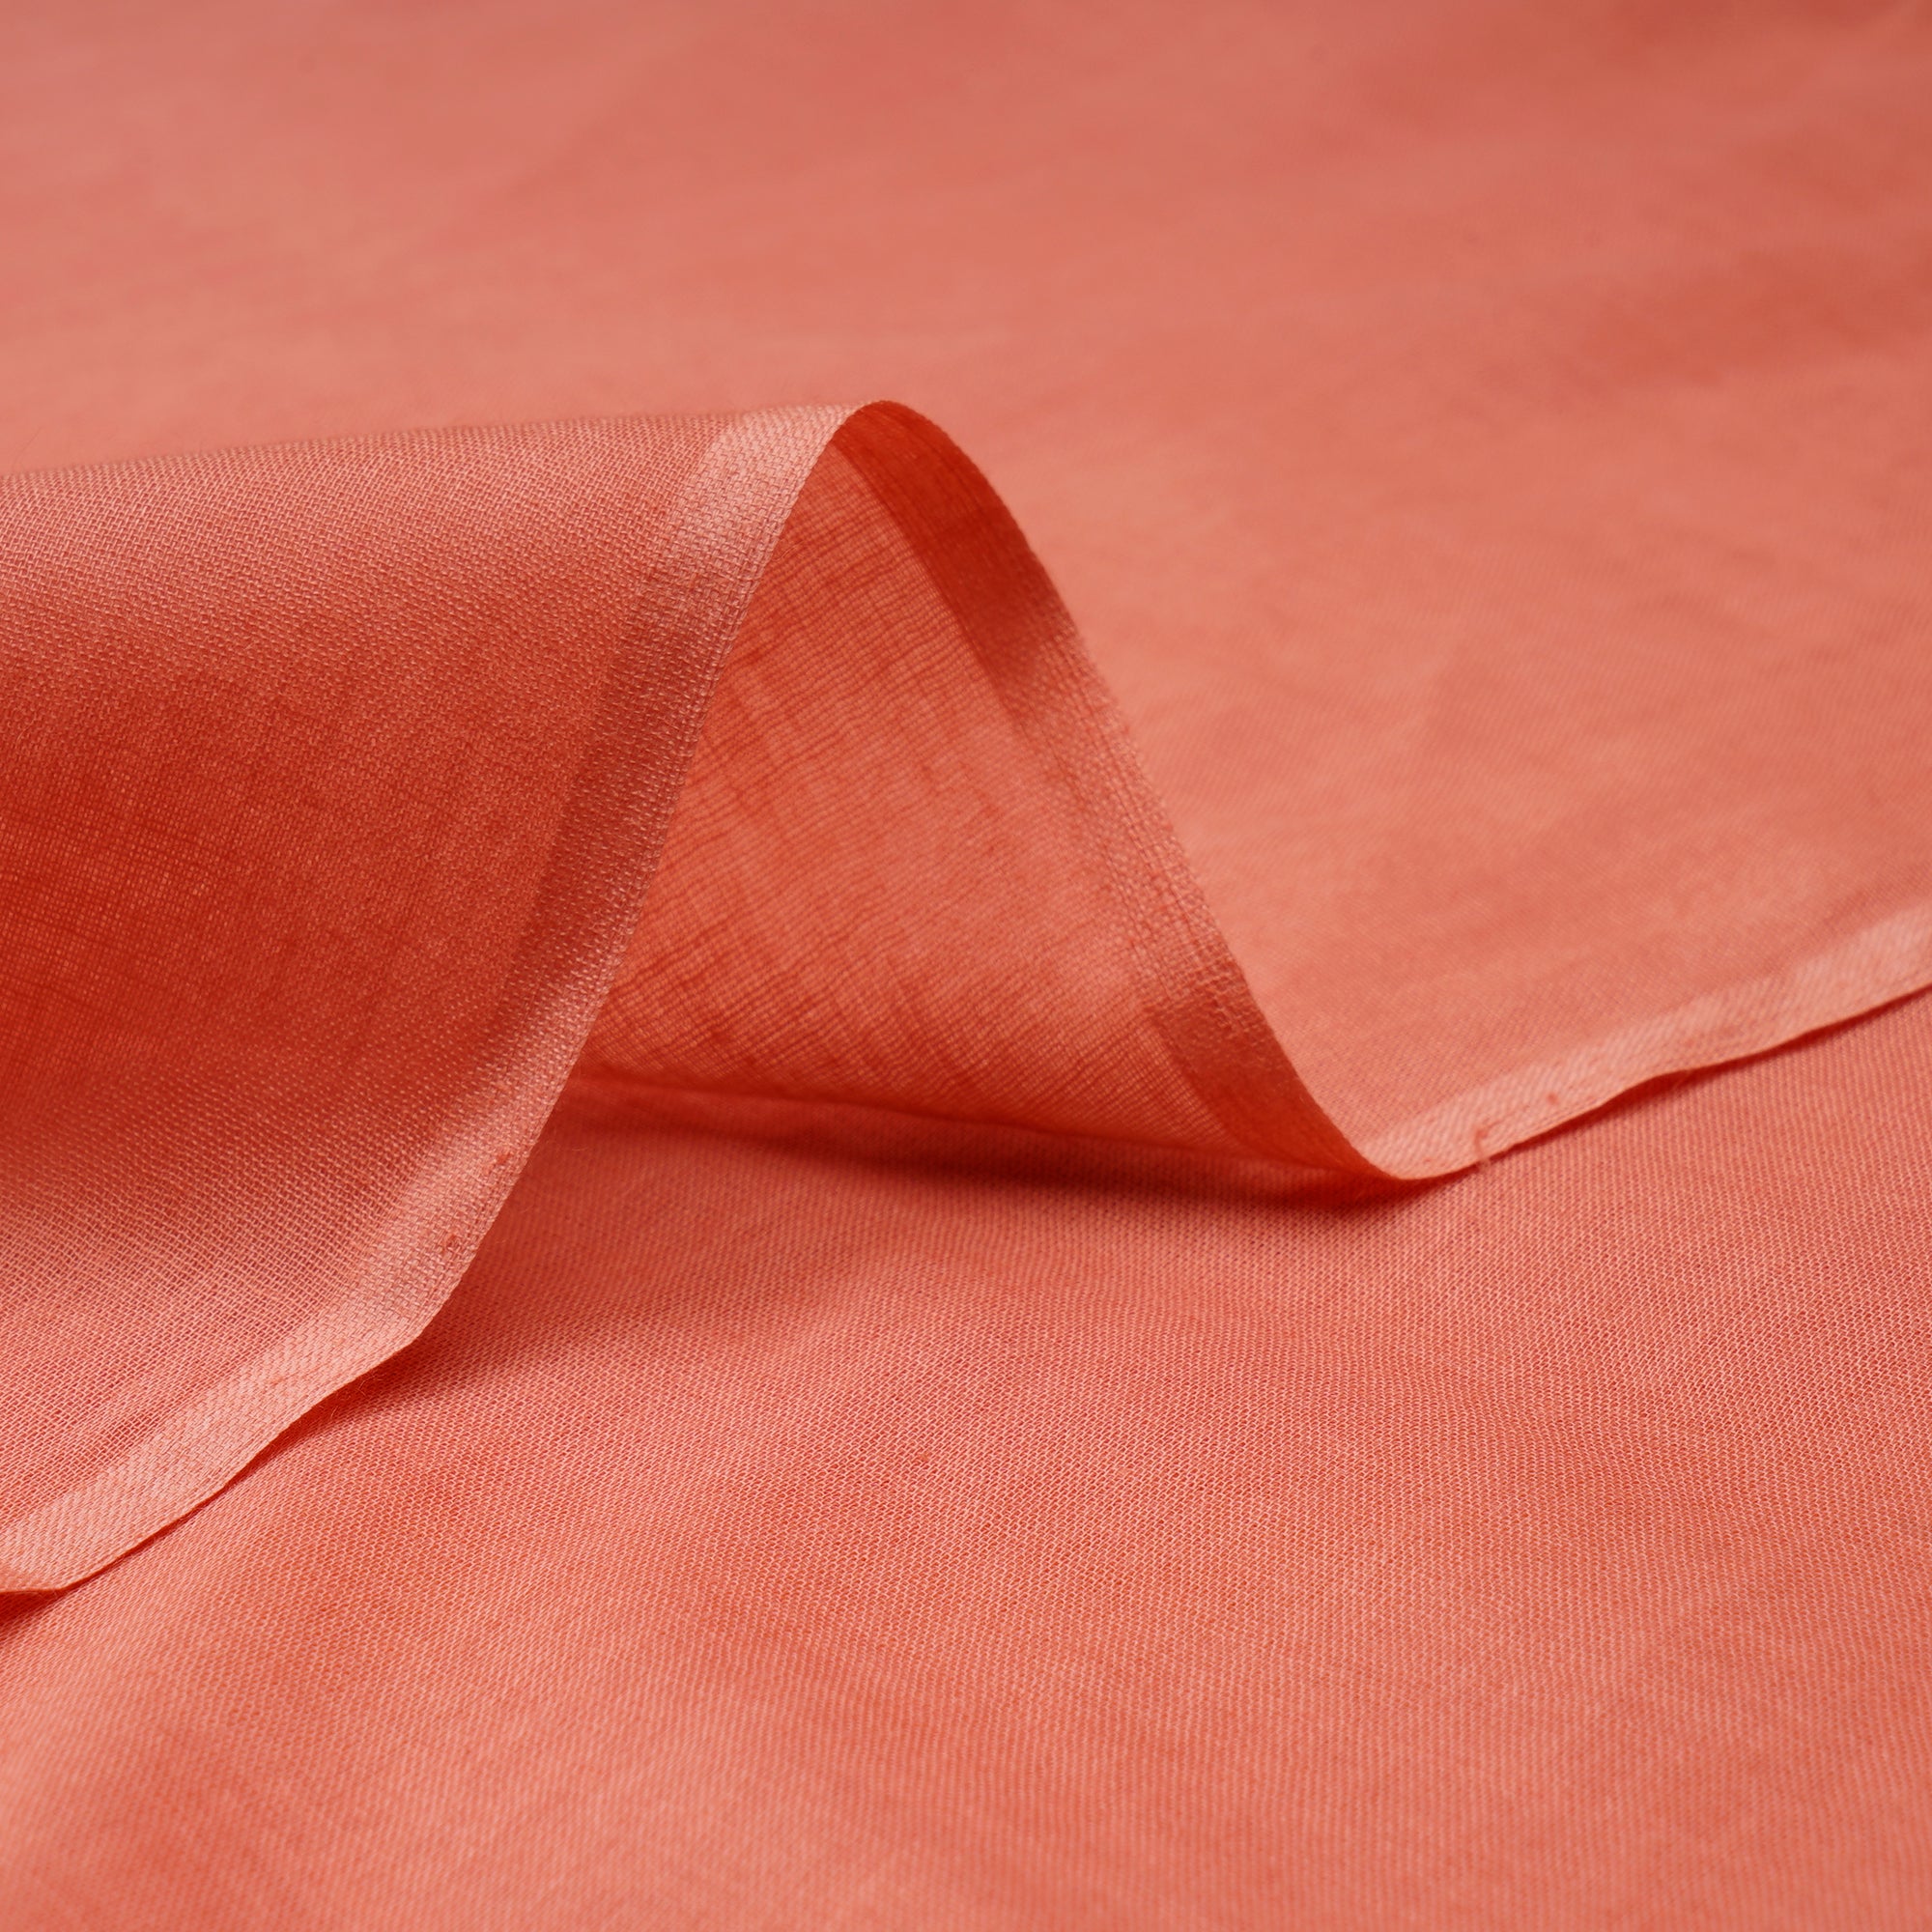 Burnt Coral Piece Dyed Cotton Voile Fabric